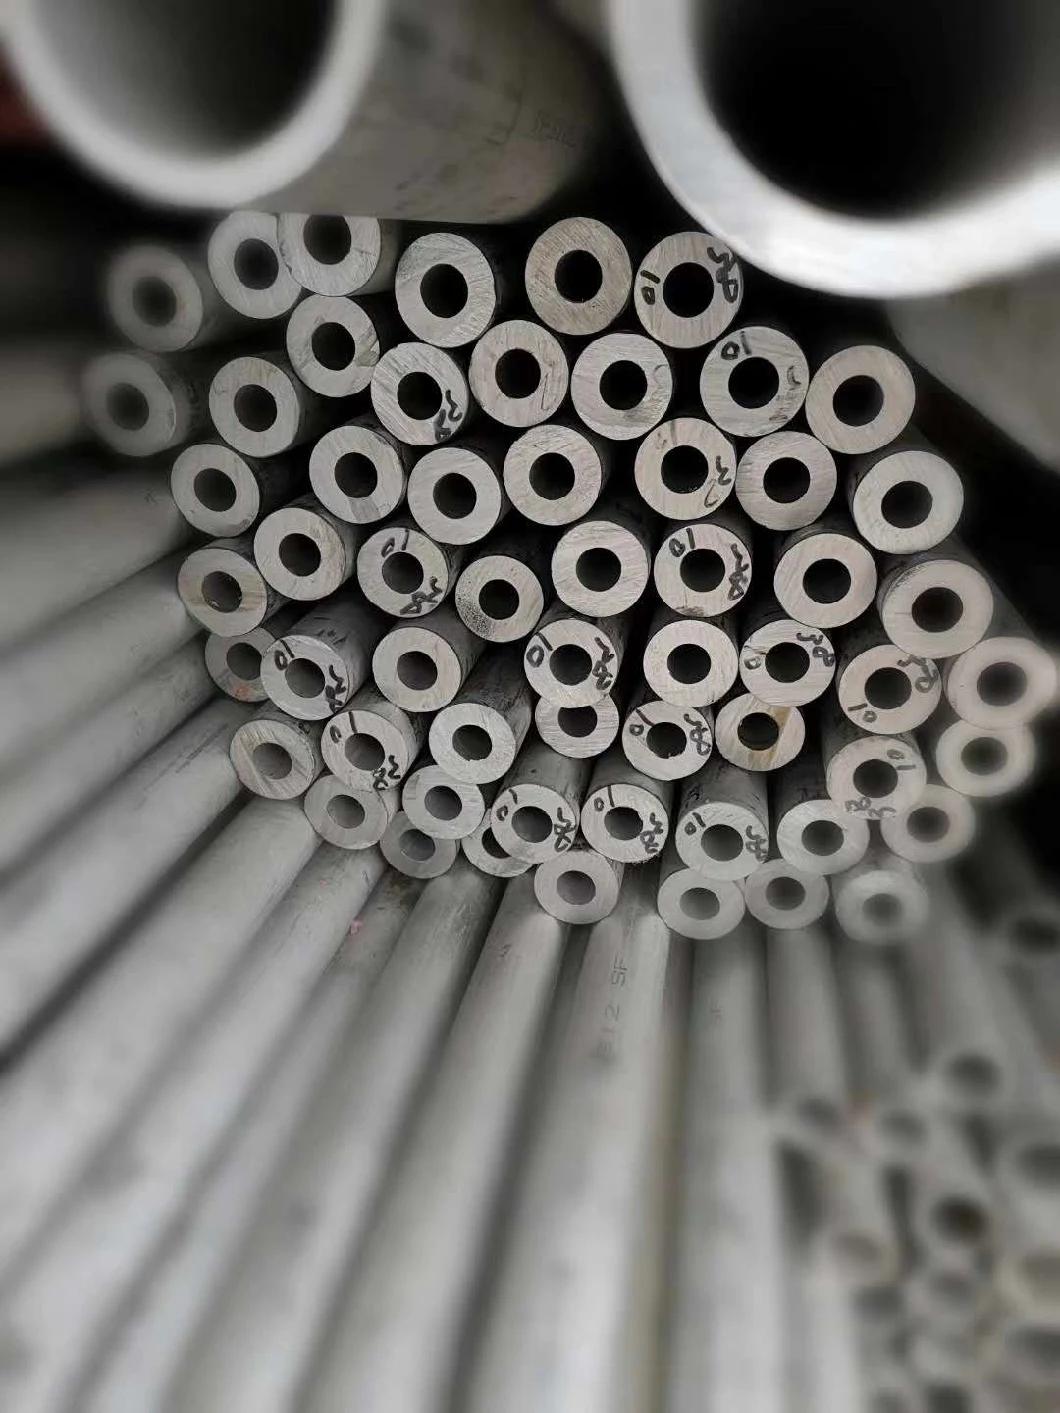 Nickel Alloy Steel Incoloy 800 Incoloy 800h Incoloy 800ht Tube / Pipe